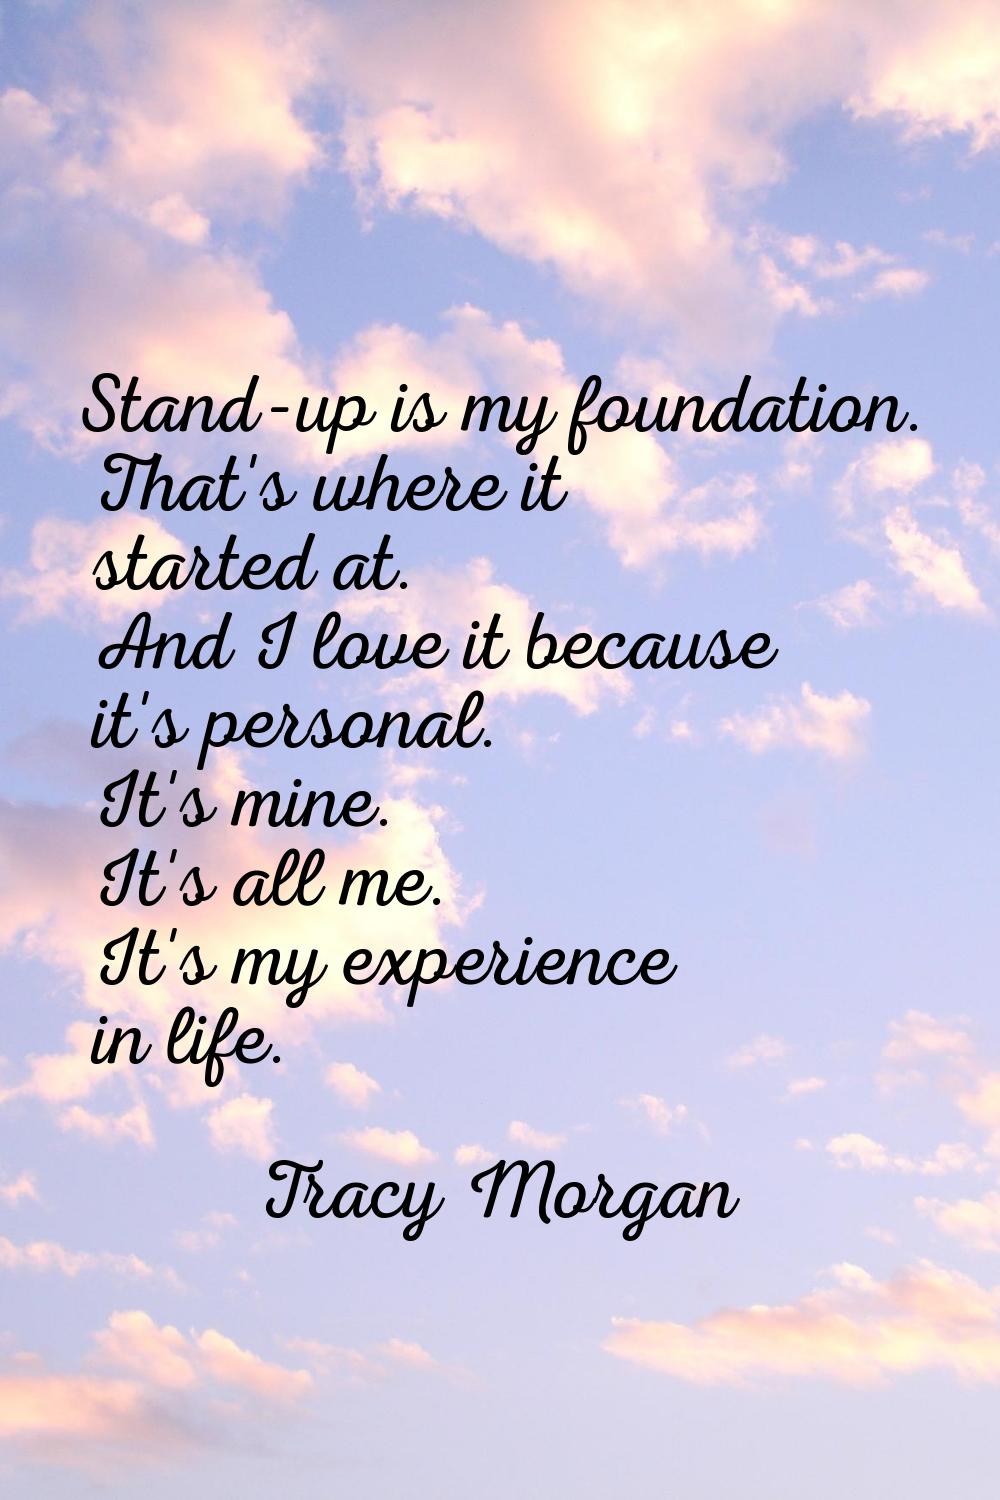 Stand-up is my foundation. That's where it started at. And I love it because it's personal. It's mi